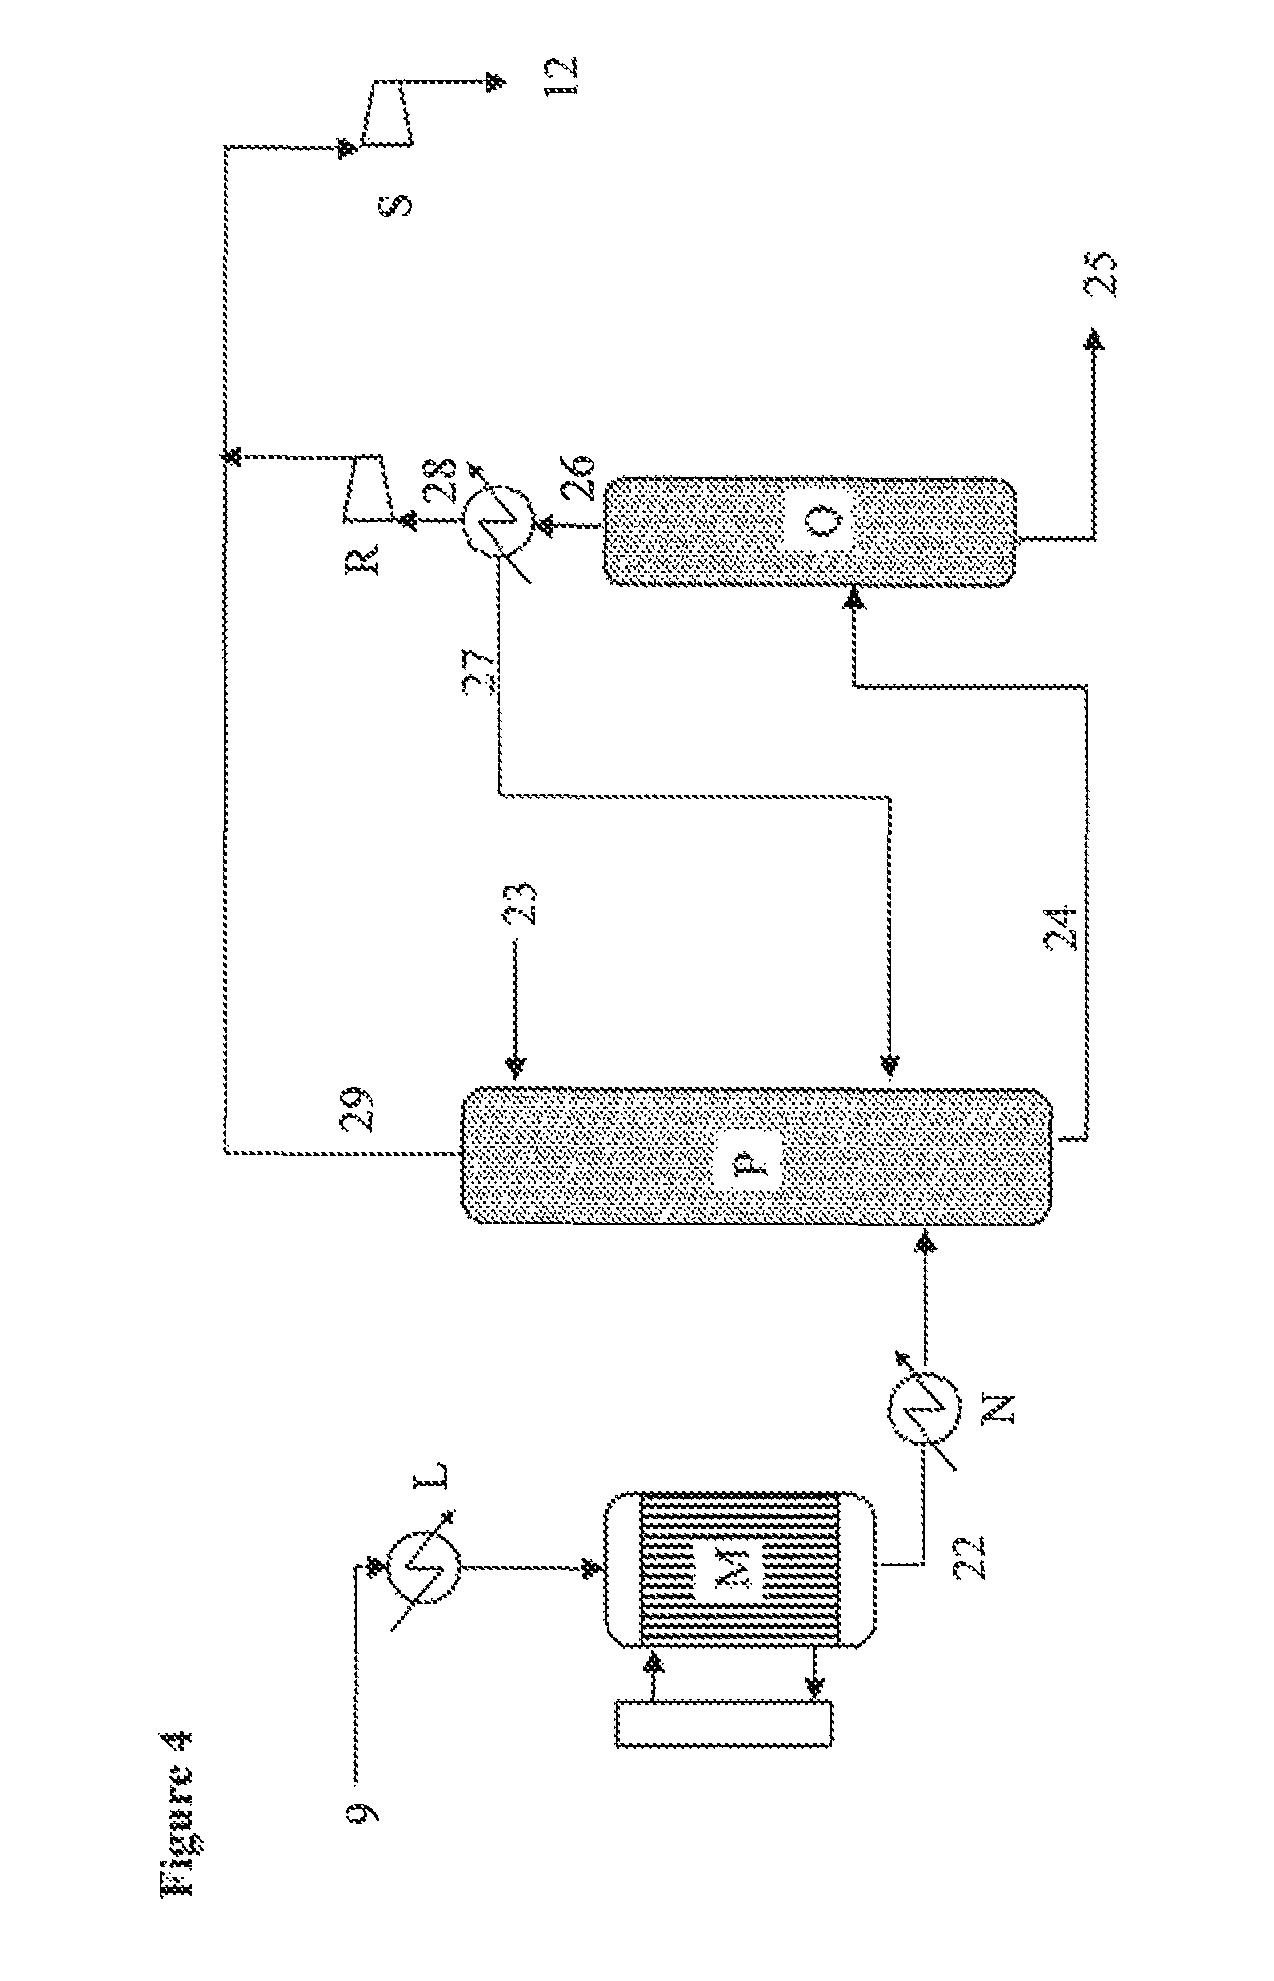 Process for manufacturing acrolein and/or acrylic acid from glycerol